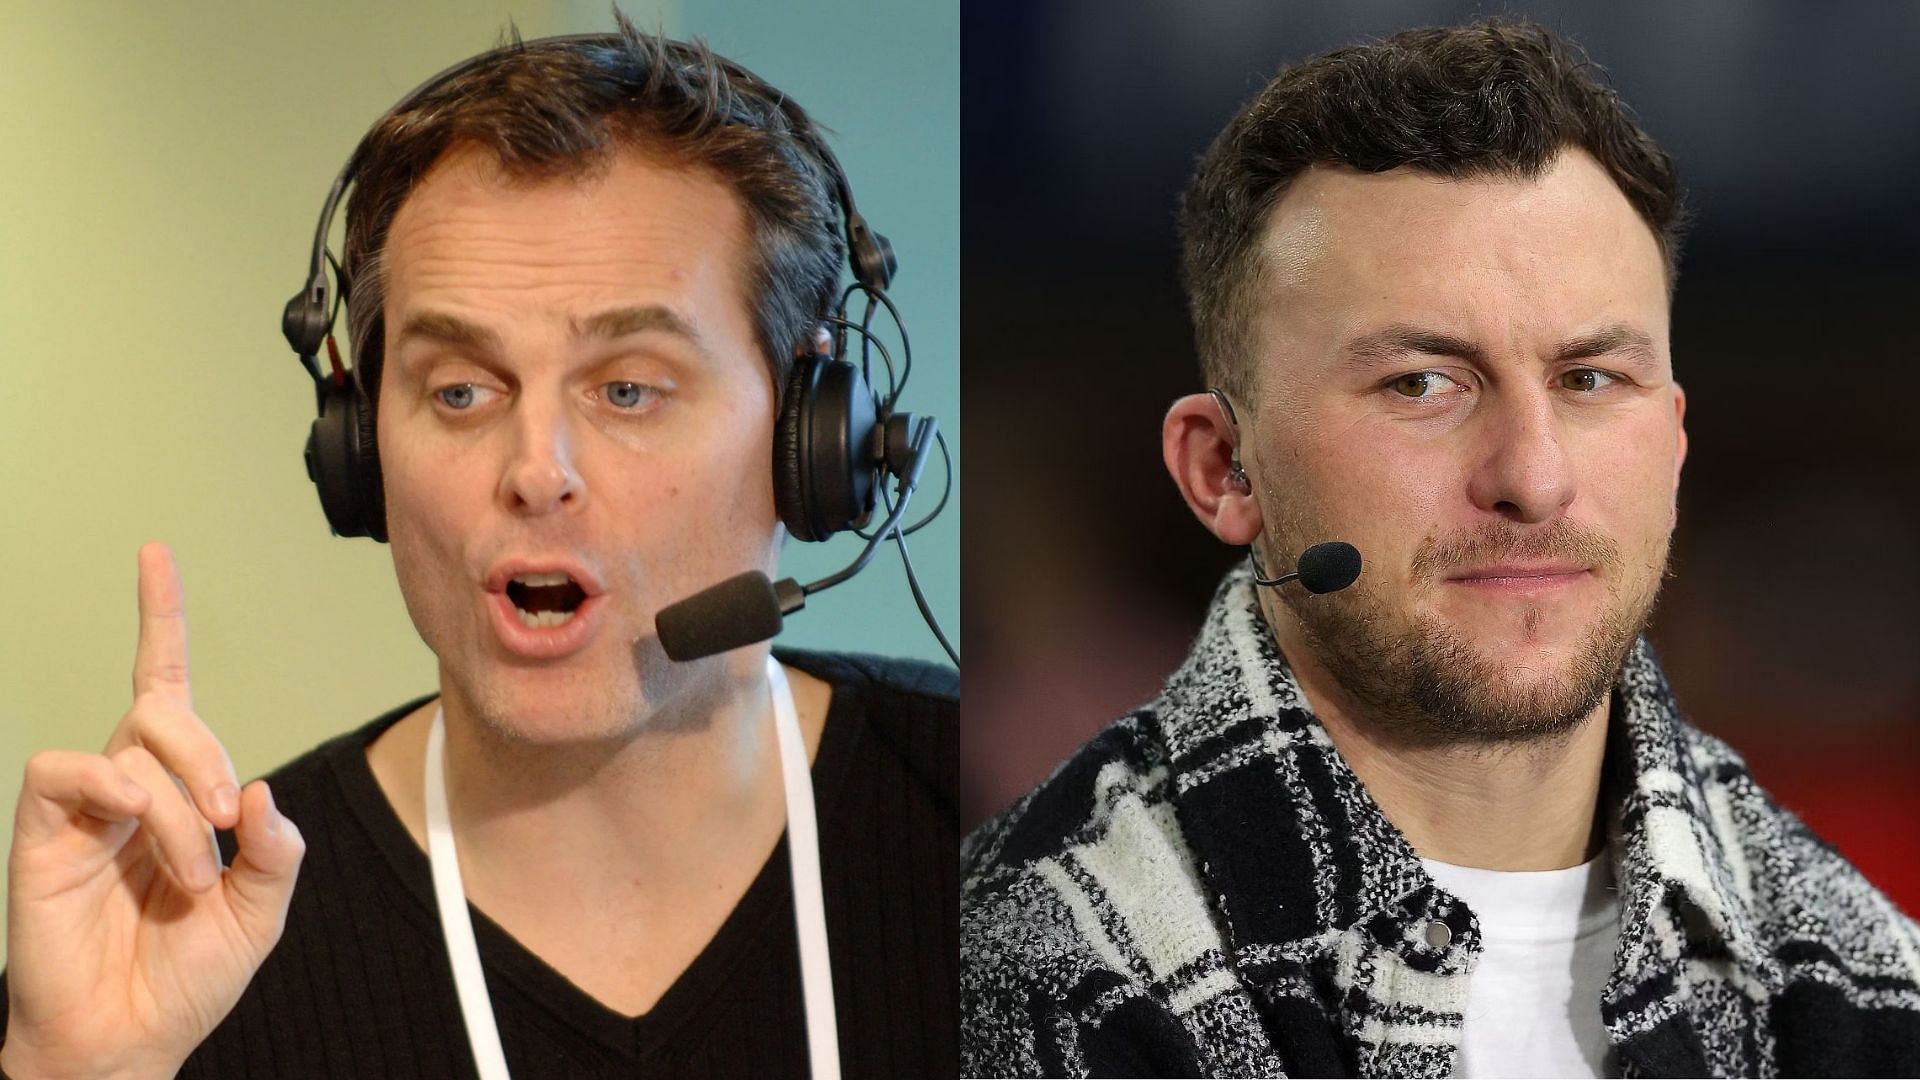 FS1 host Colin Cowherd criticized Johnny Manziel for admitting to not watching tape during his time with the Cleveland Browns.